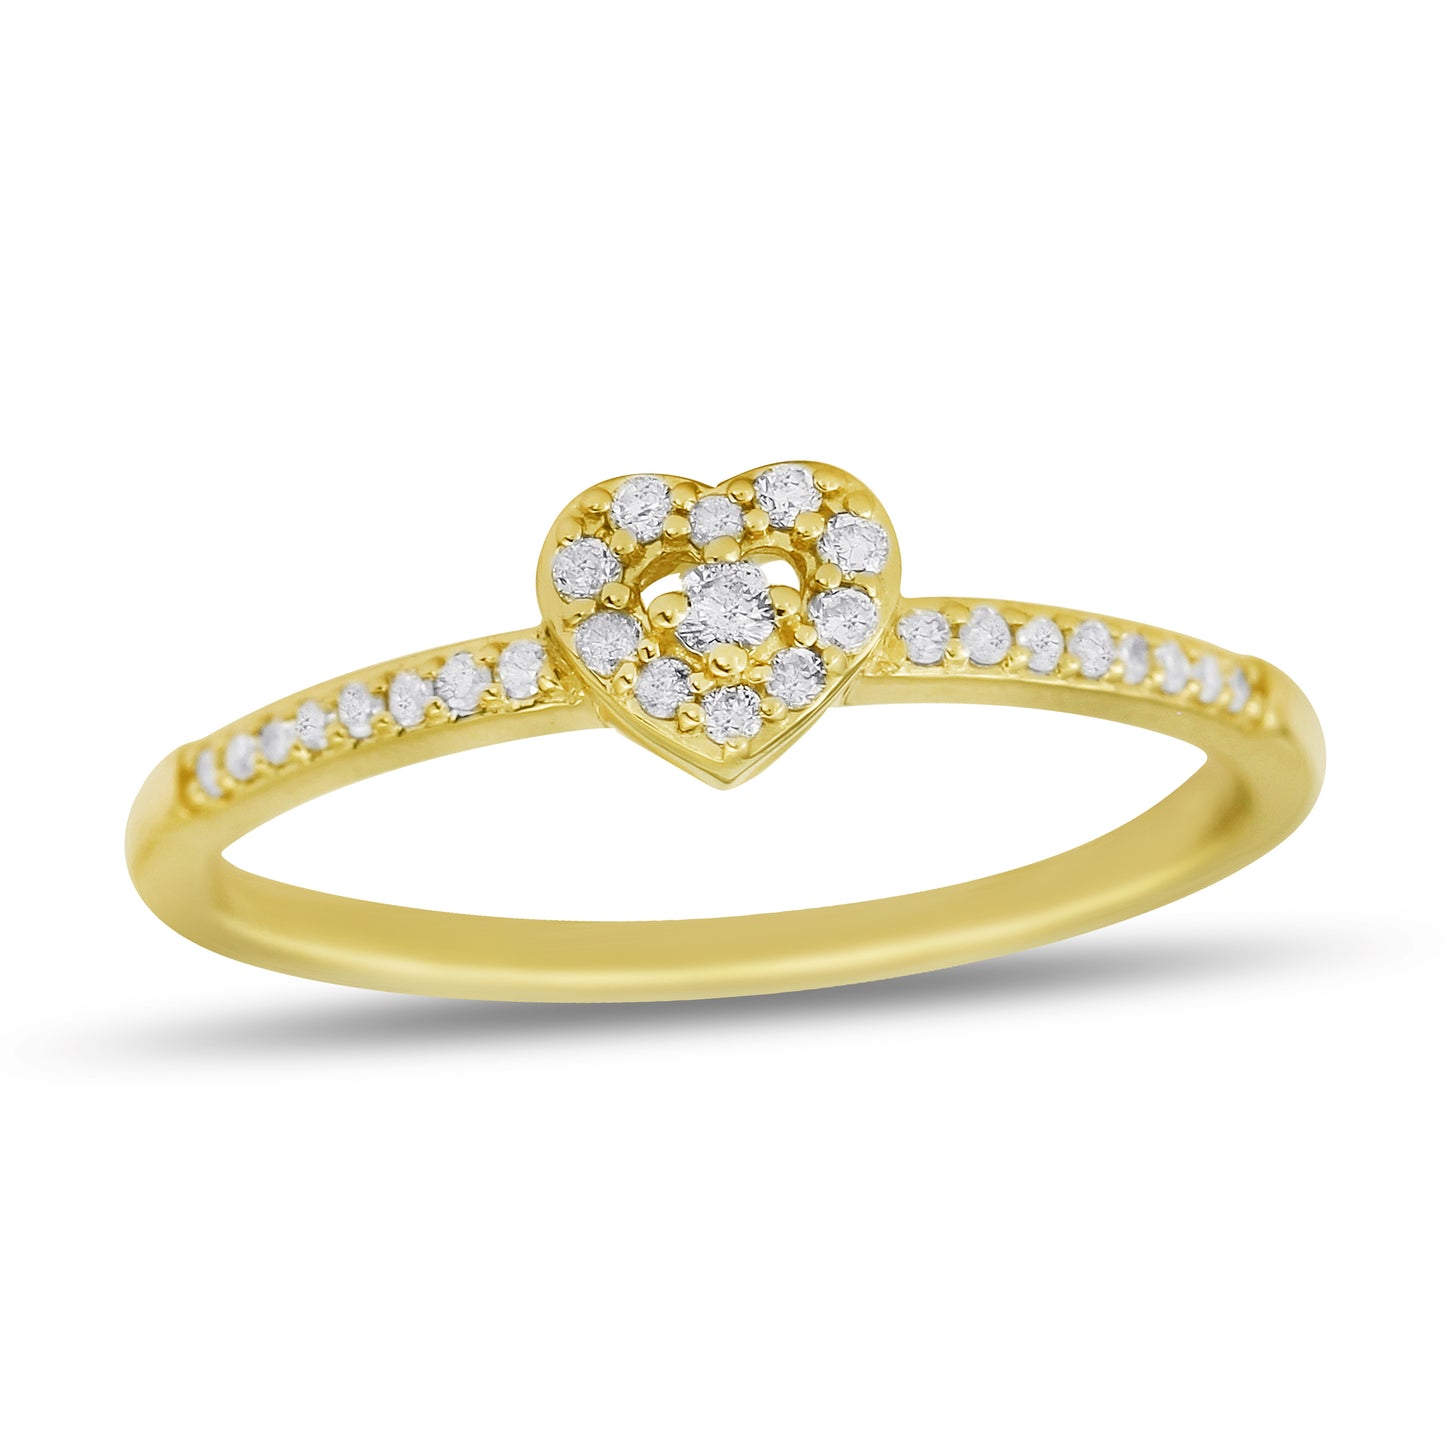 1/8 Carat Natural Diamond Halo Heart Ring for Women in 14k White and Yellow Gold By Belantina